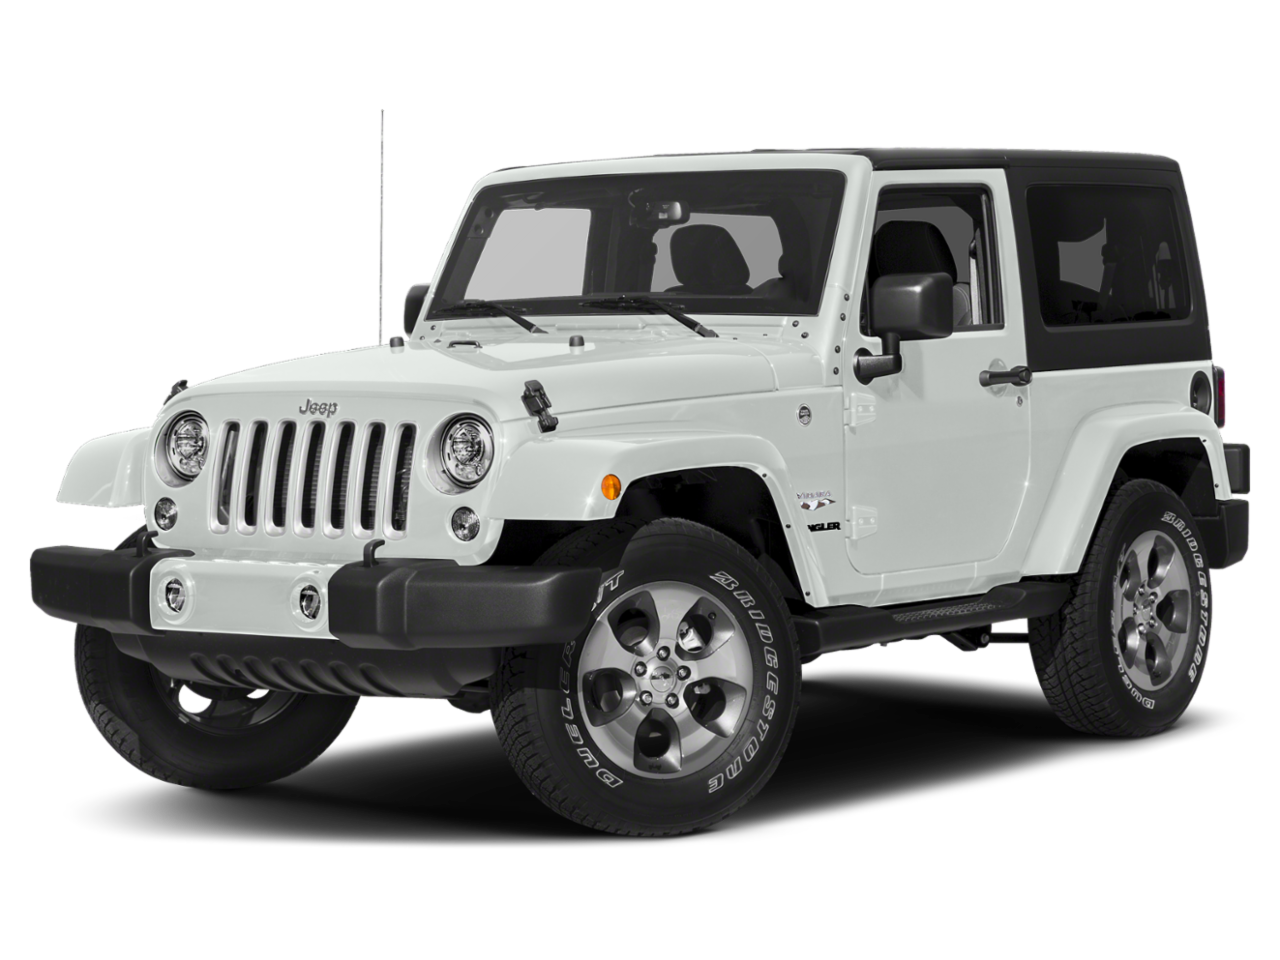 2017 Jeep Wrangler - What does it mean when 